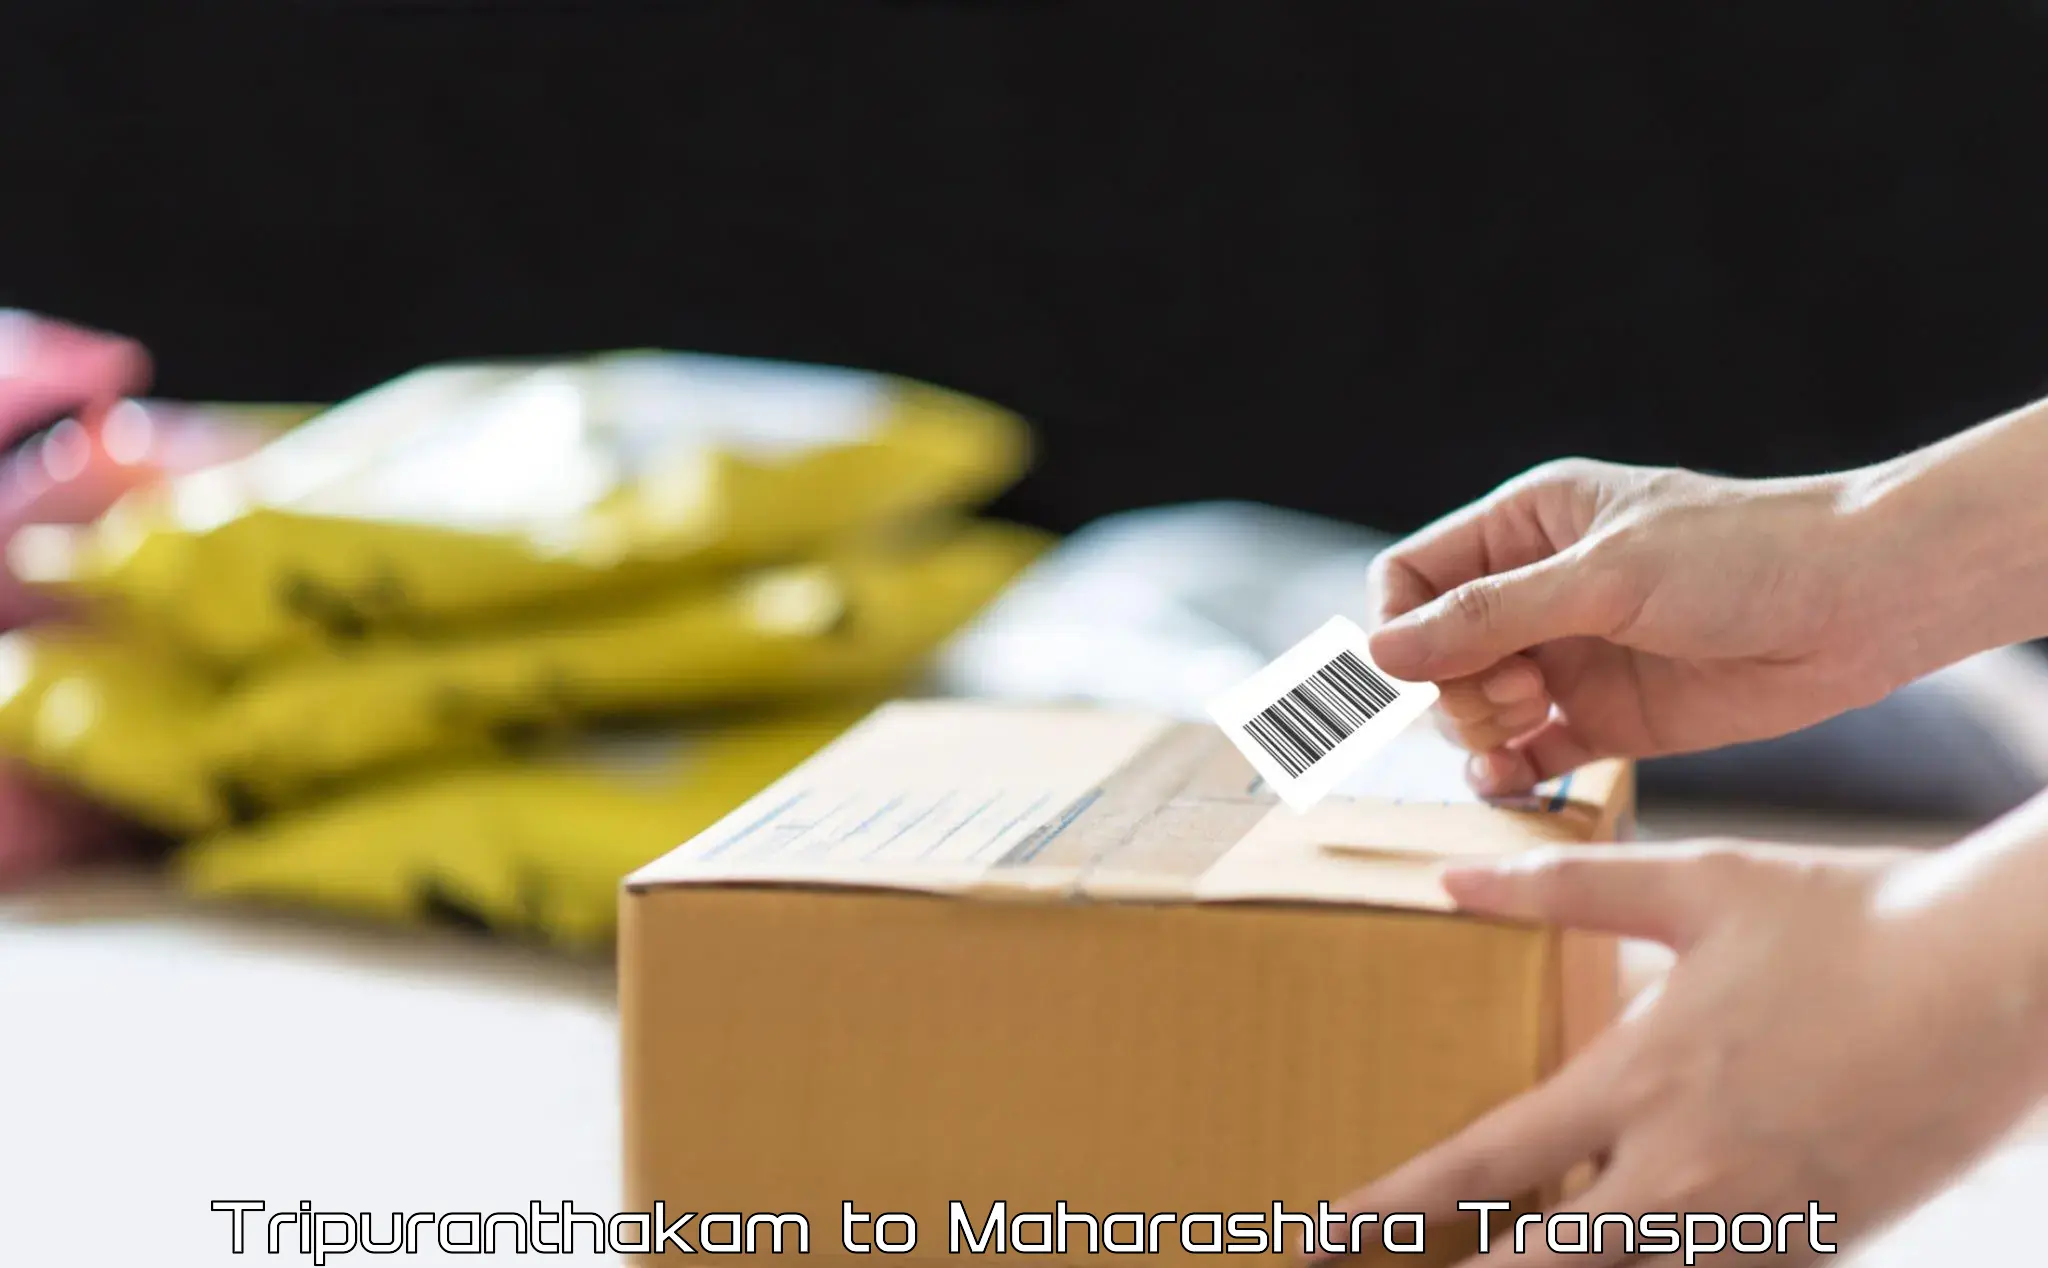 Package delivery services Tripuranthakam to Mandangad